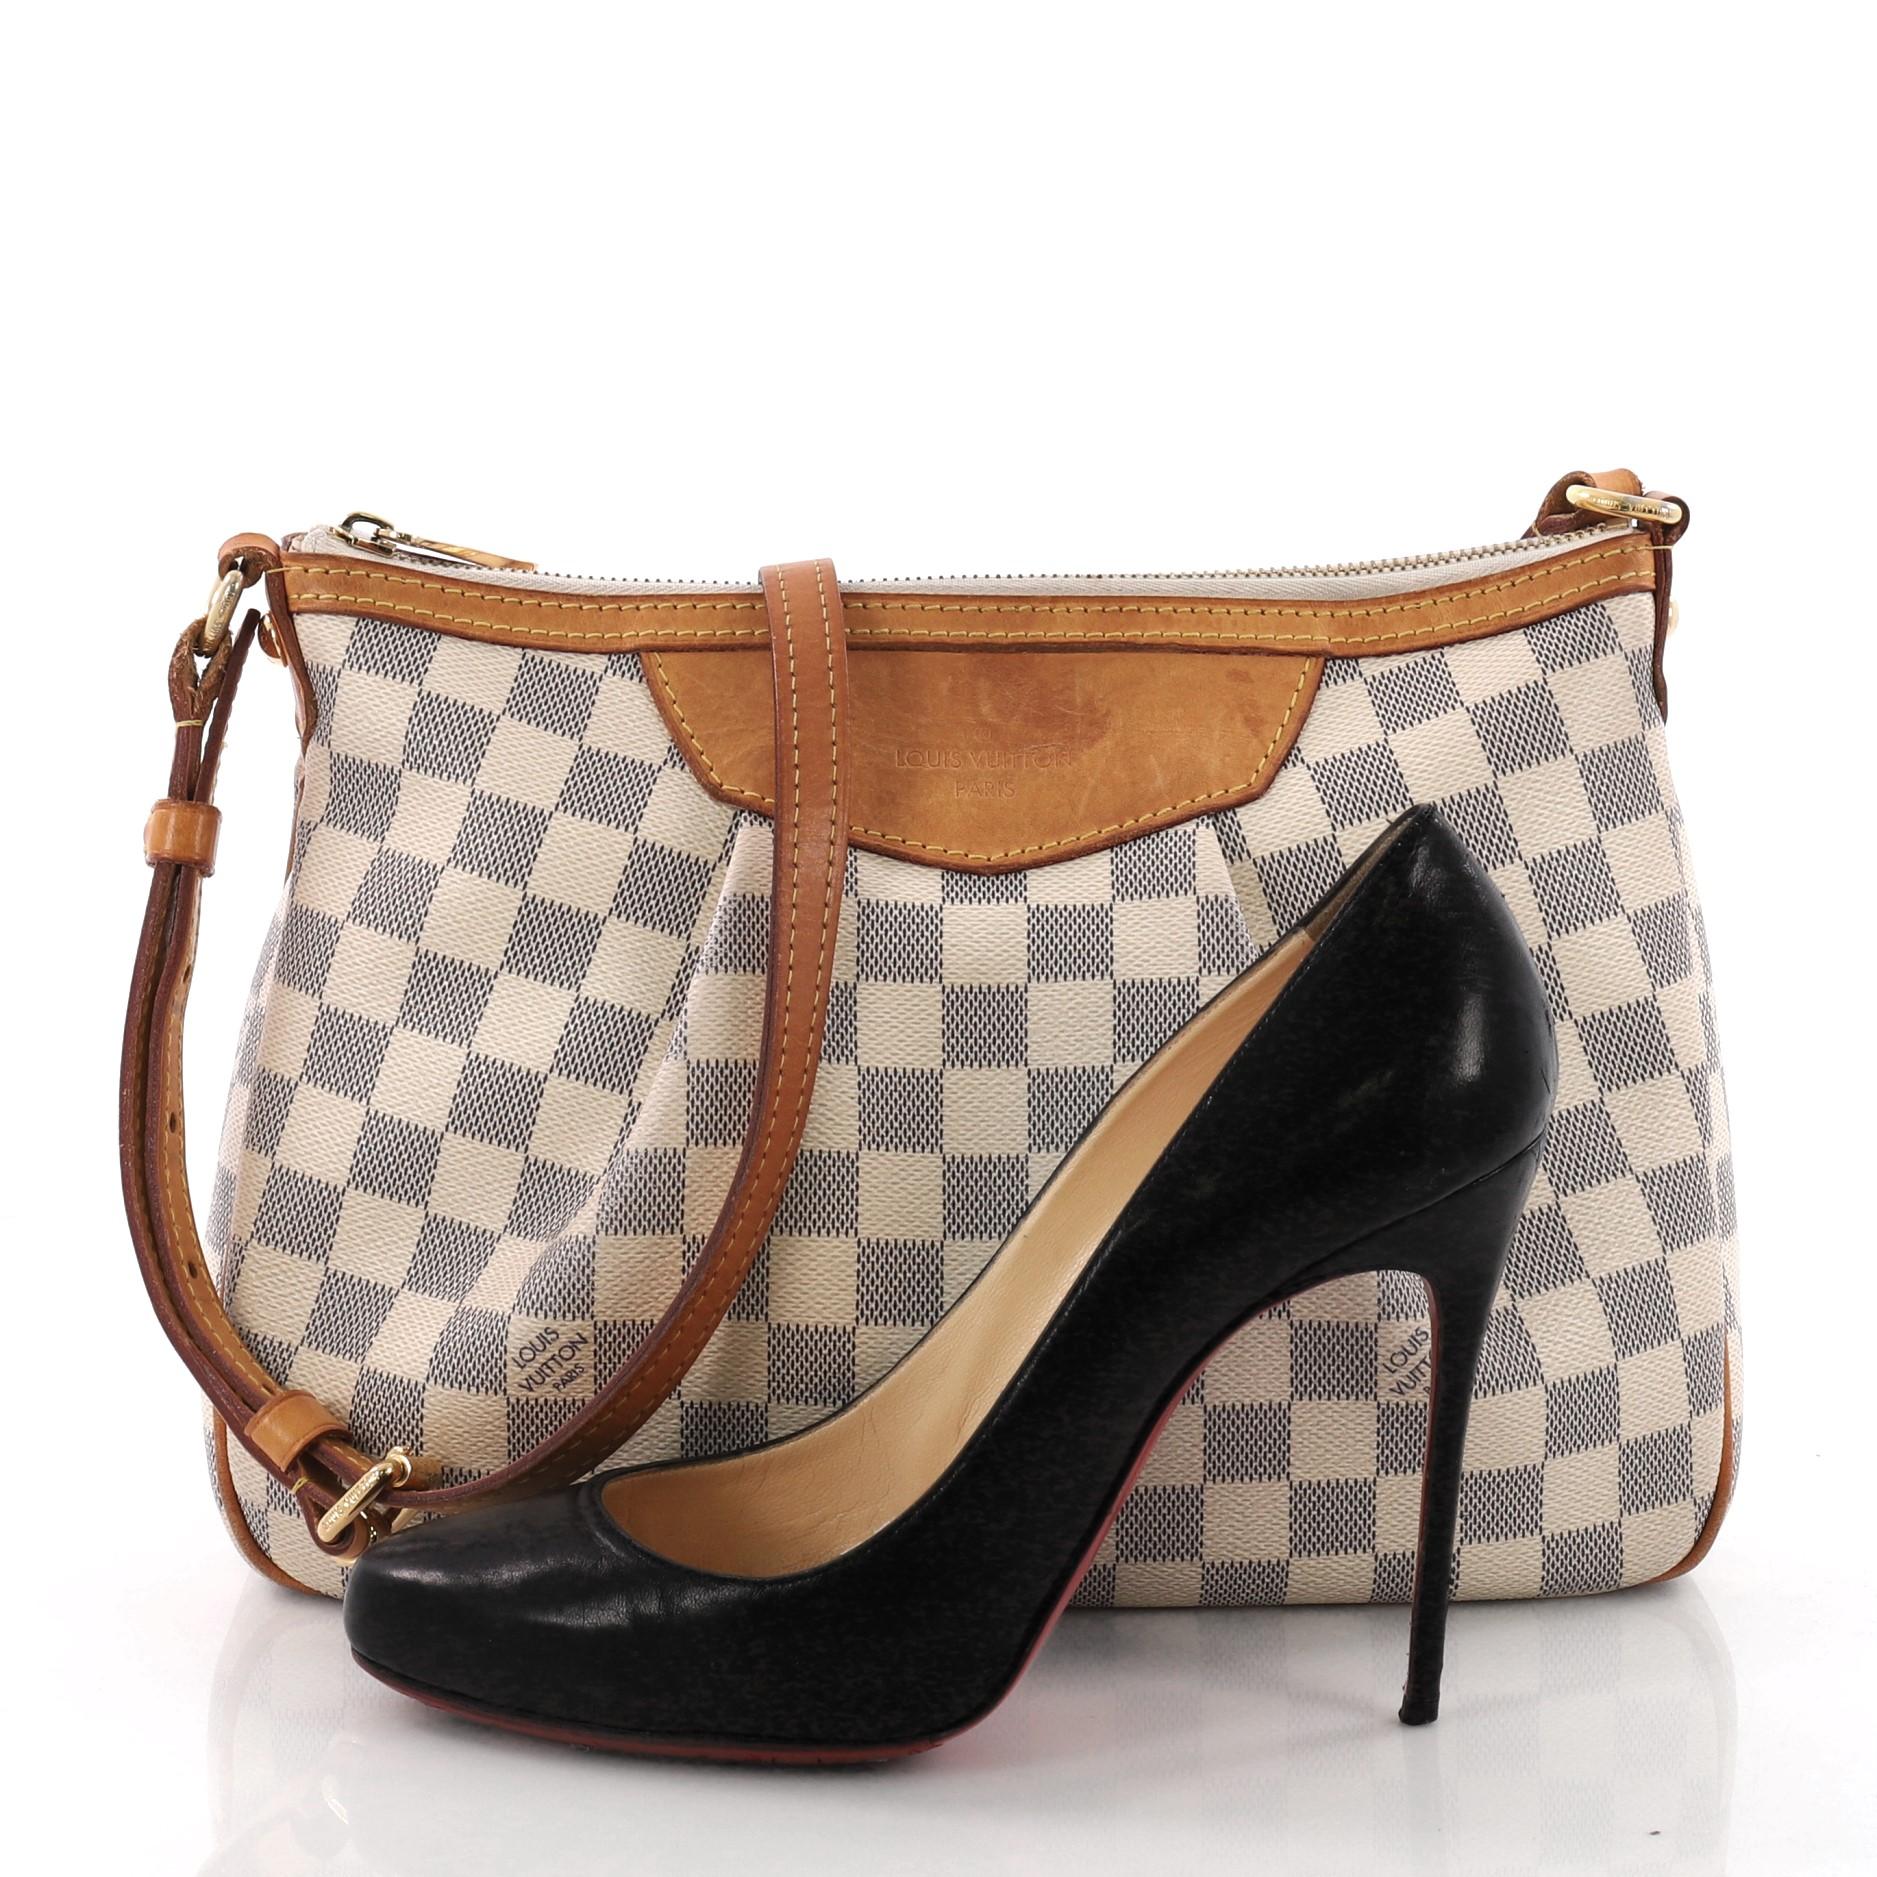 This authentic Louis Vuitton Siracusa Handbag Damier PM inspired by the historic Italian city, is perfect for on-the-go fashionistas. Crafted in damier azur coated canvas, this functional crossbody features a feminine pleated silhouette, vachetta